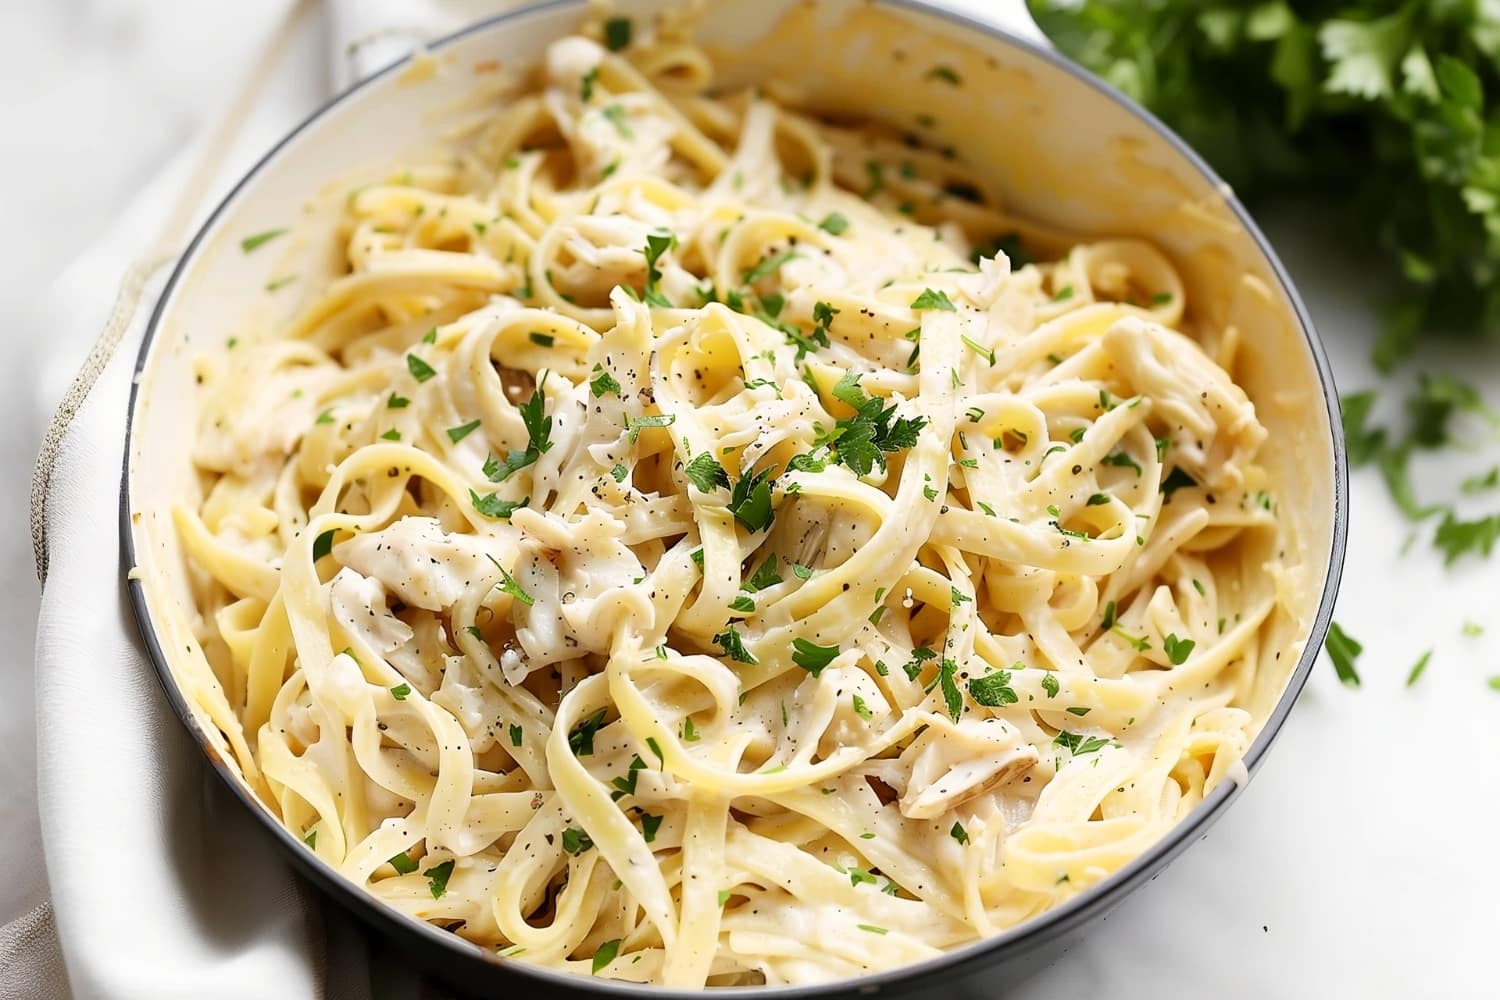 Treat your taste buds to a decadent delight as crab and fettuccine dance together in a luscious Alfredo sauce